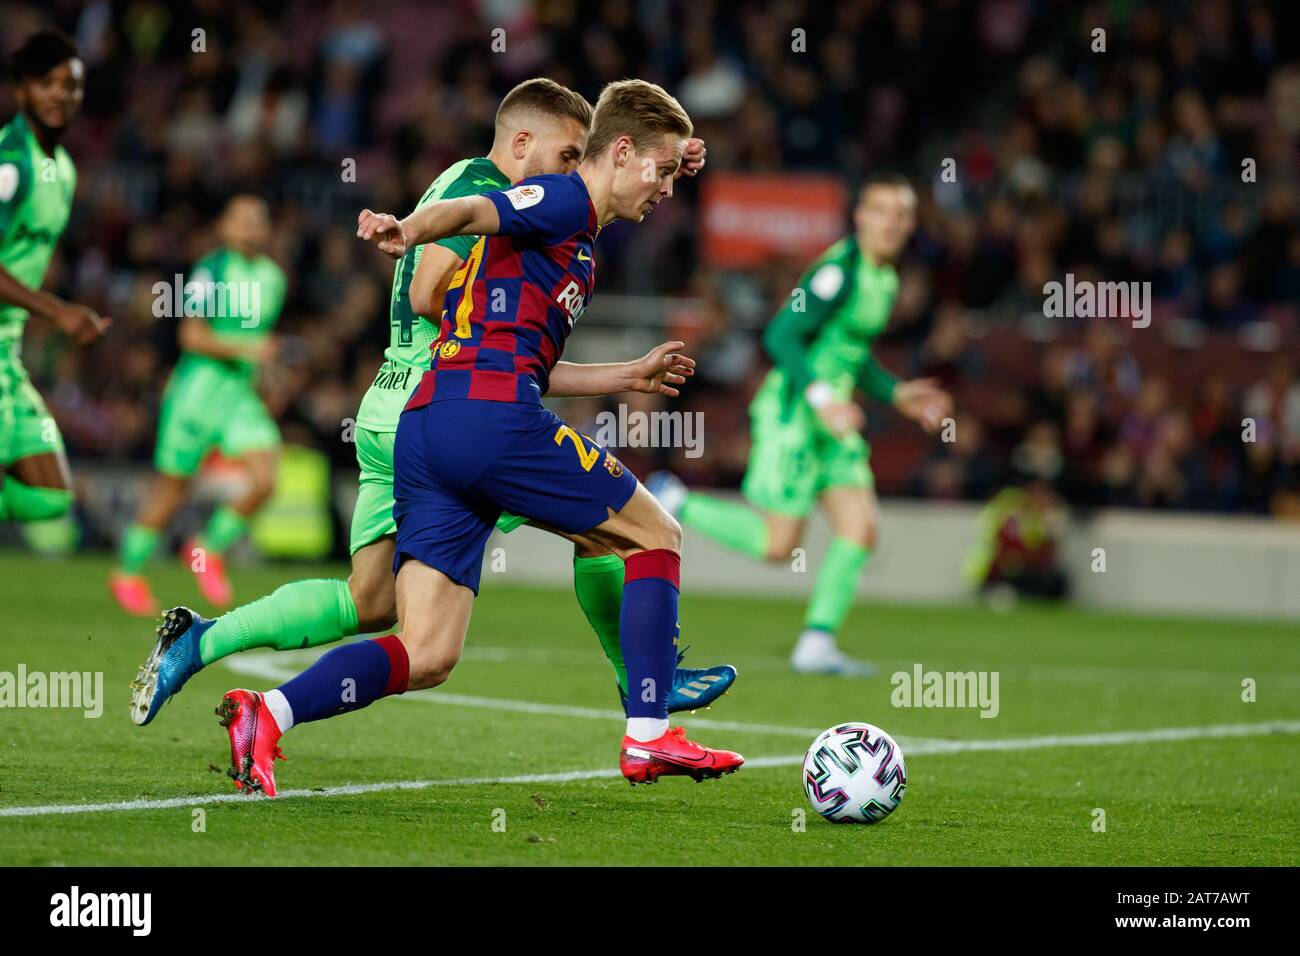 BARCELONA, SPAIN - JANUARY 30:.Frenkie de Jong of FC Barcelona during the Spanish Copa del Rey Round of 16 match between FC Barcelona and SD Leganes at Camp Nou on January 30, 2020 in Barcelona, Spain. (Photo by DAX/ESPA-Images) Stock Photo